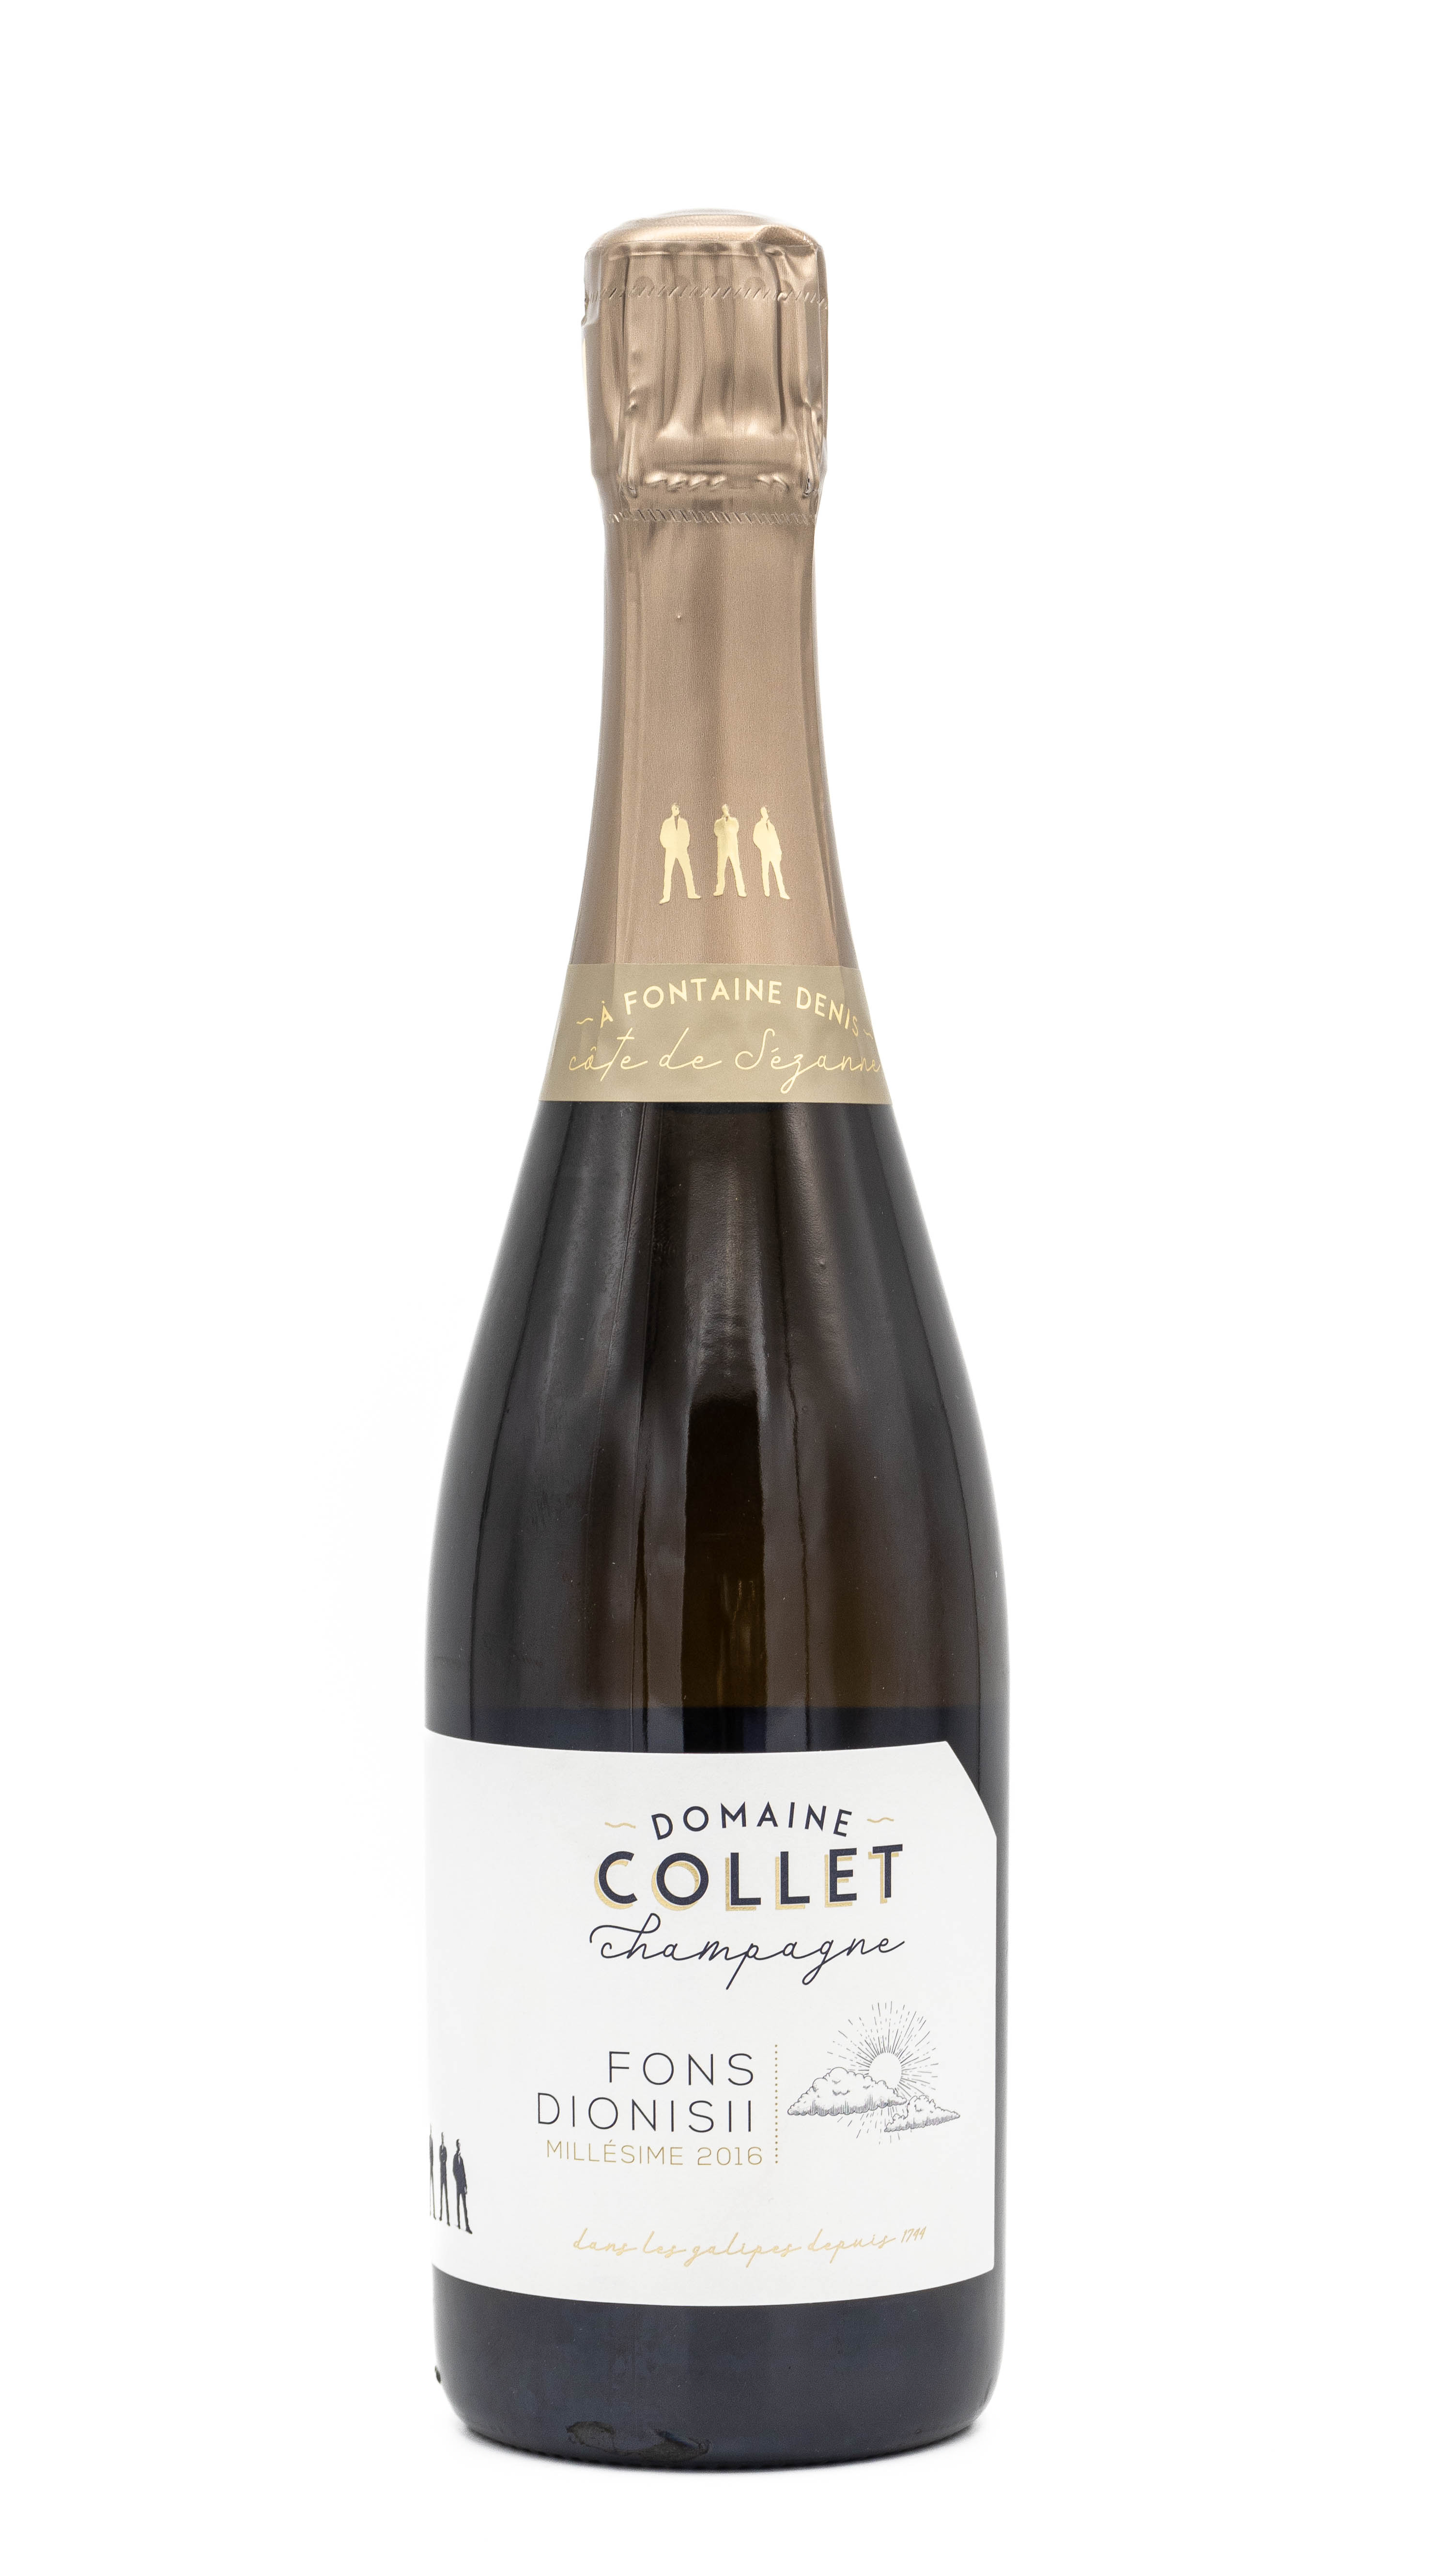 Champagne Domaine Collet, Fons Dionisii Extra Brut 2016